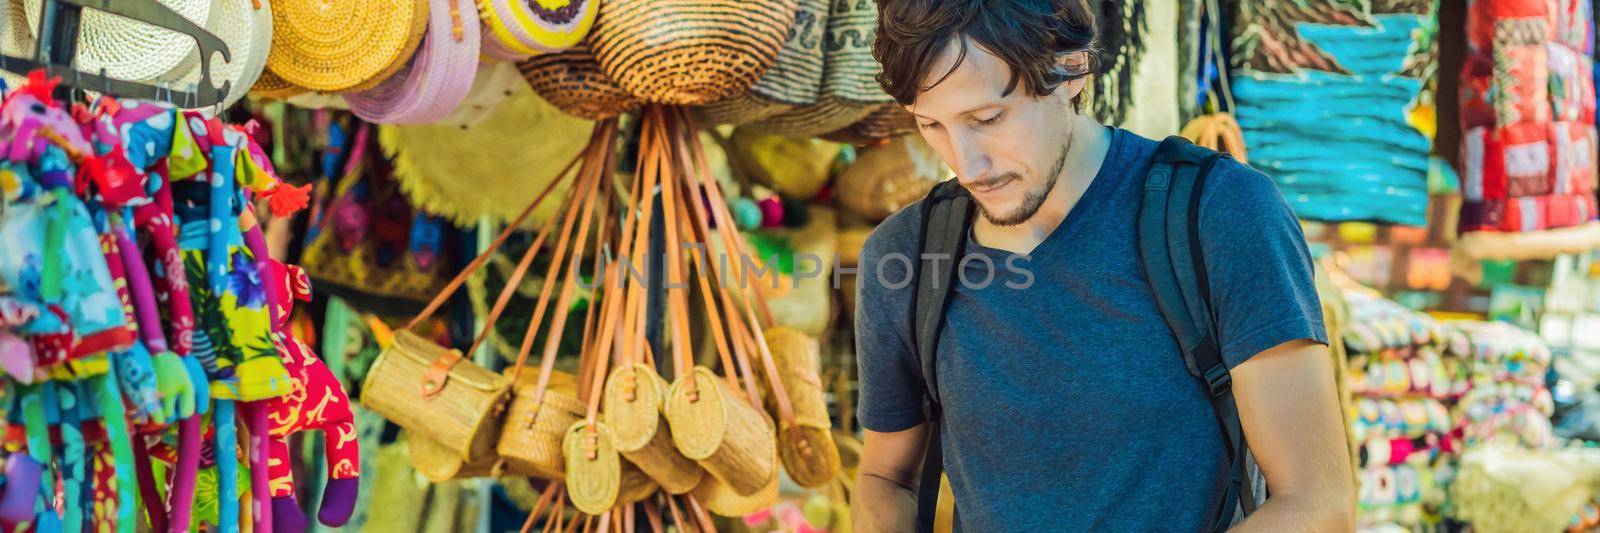 Man at a market in Ubud, Bali. Typical souvenir shop selling souvenirs and handicrafts of Bali at the famous Ubud Market, Indonesia. Balinese market. Souvenirs of wood and crafts of local residents BANNER, LONG FORMAT by galitskaya